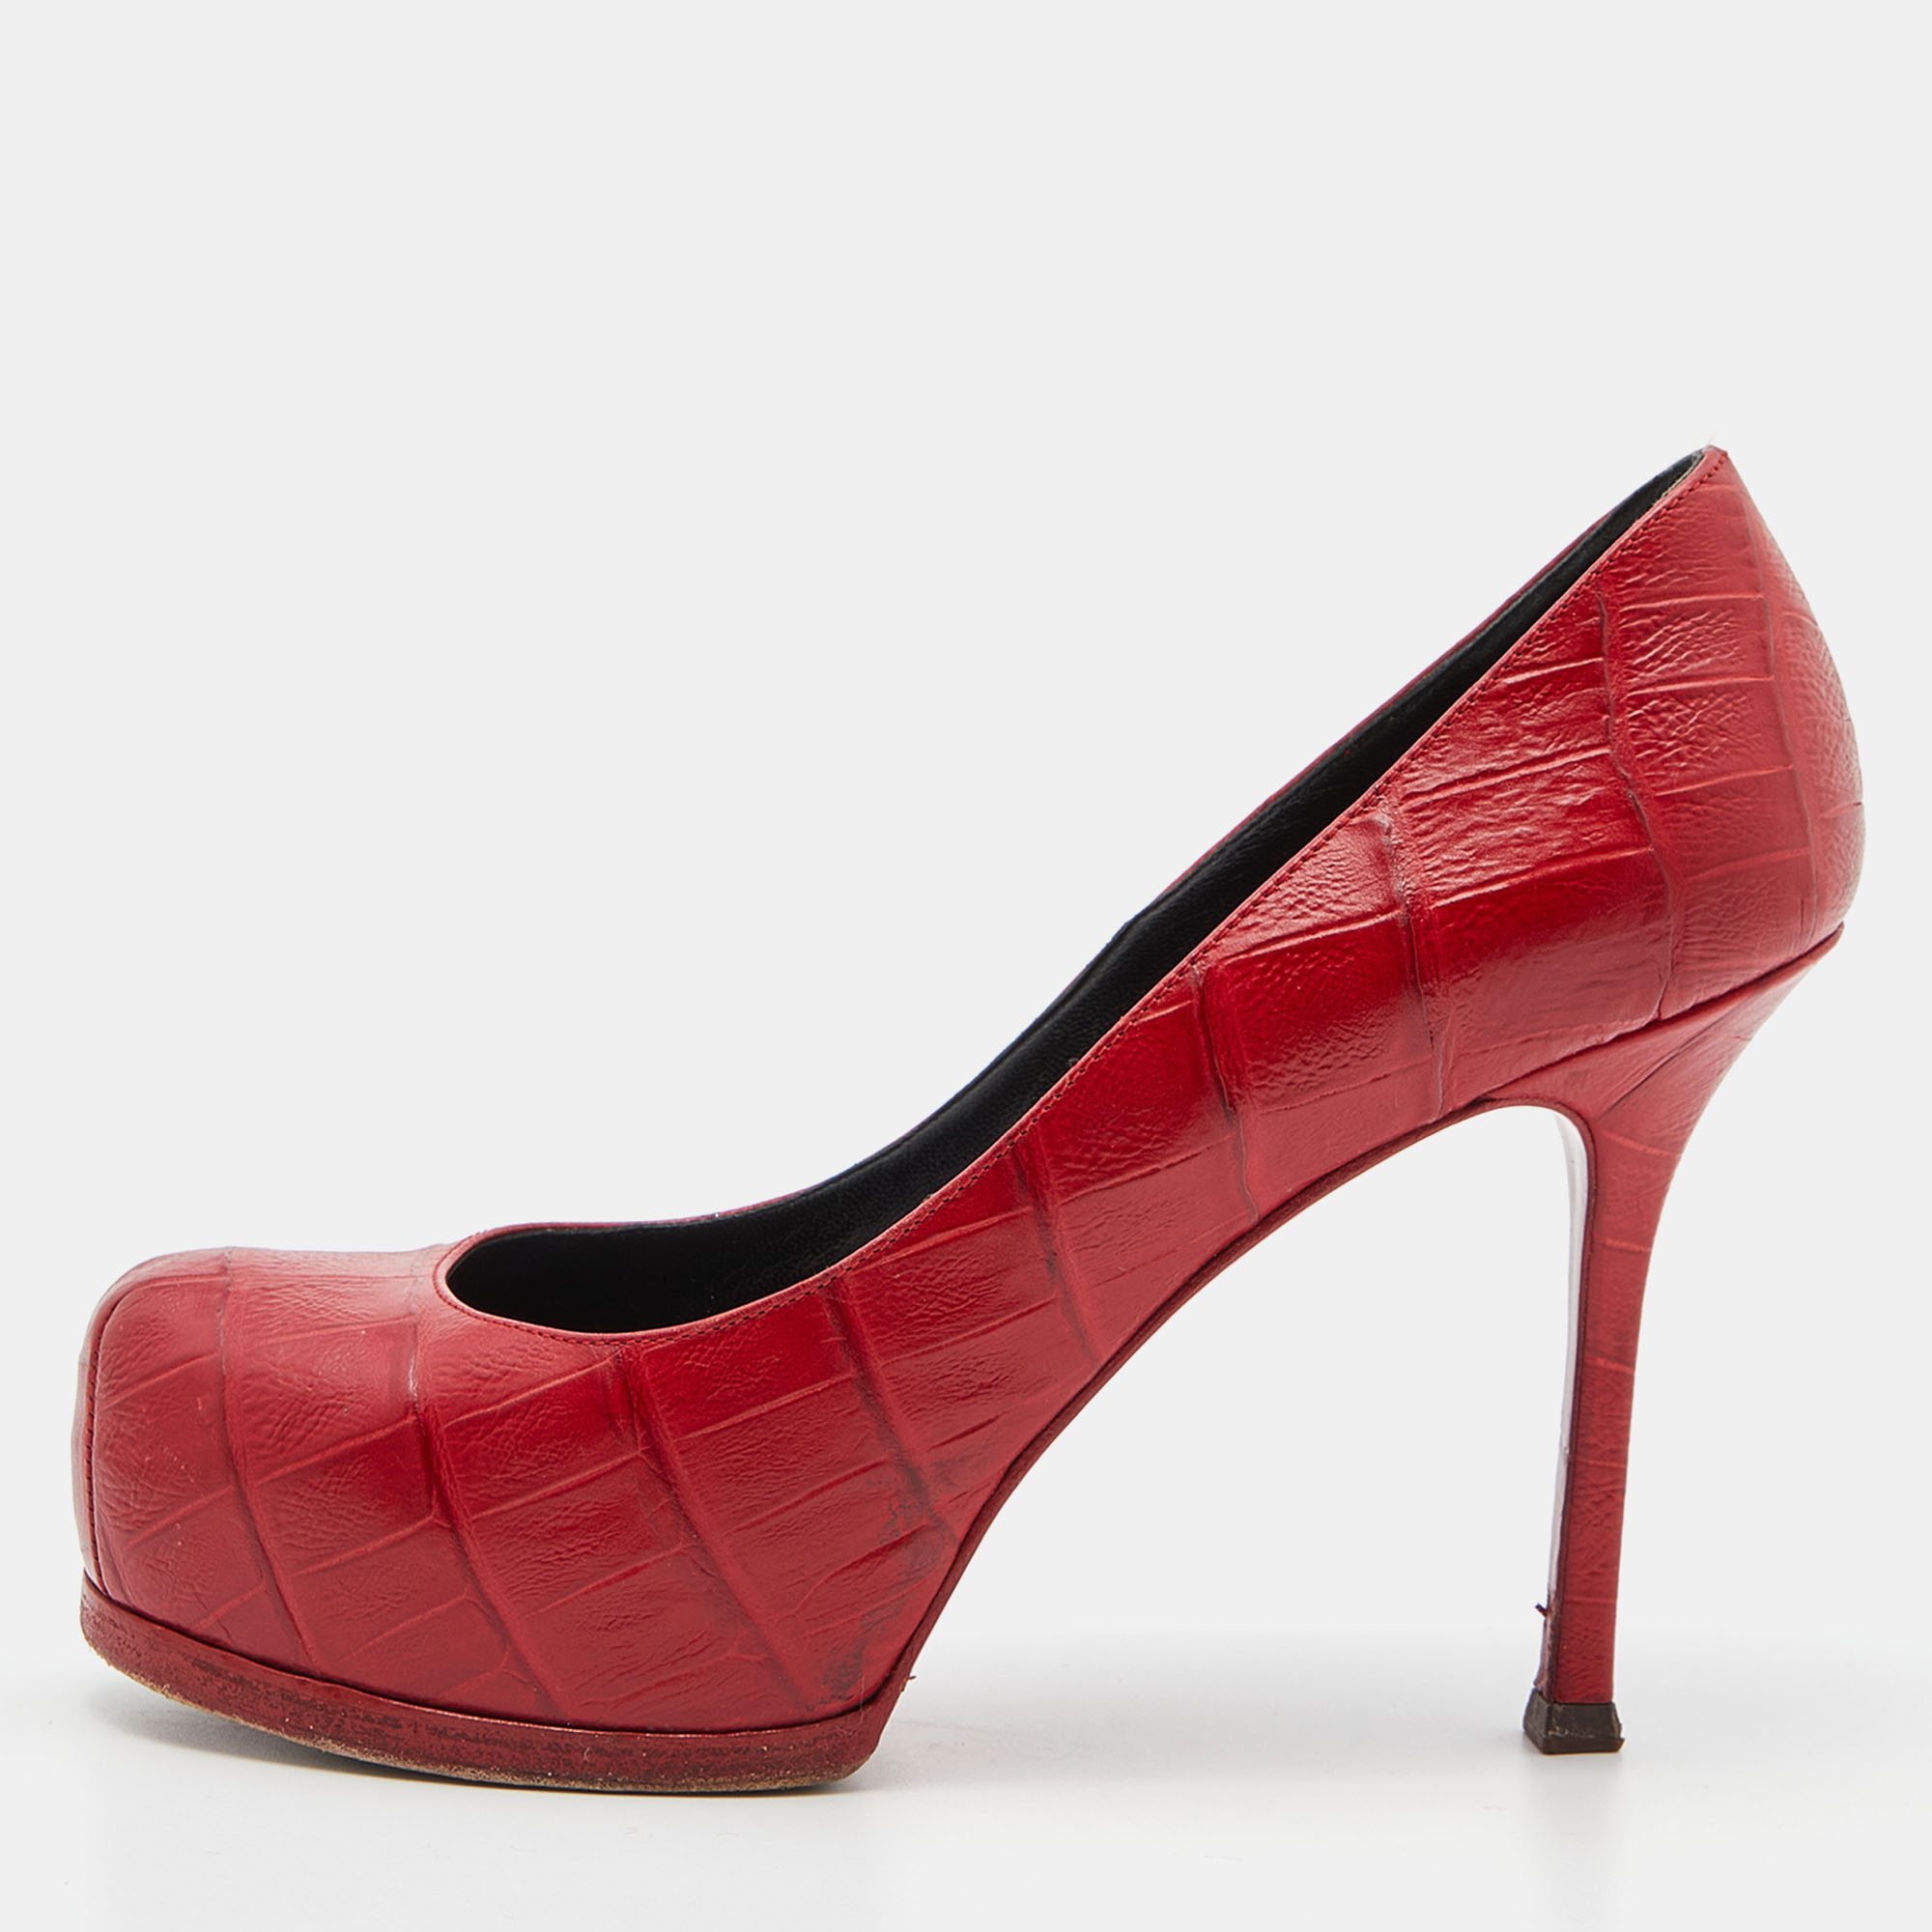 Fashionable and chic these Tribtoo pumps from Saint Laurent will cut an alluring silhouette from day to night. Crafted from leather the pumps have a red shade concealed platforms and 11 cm heels.